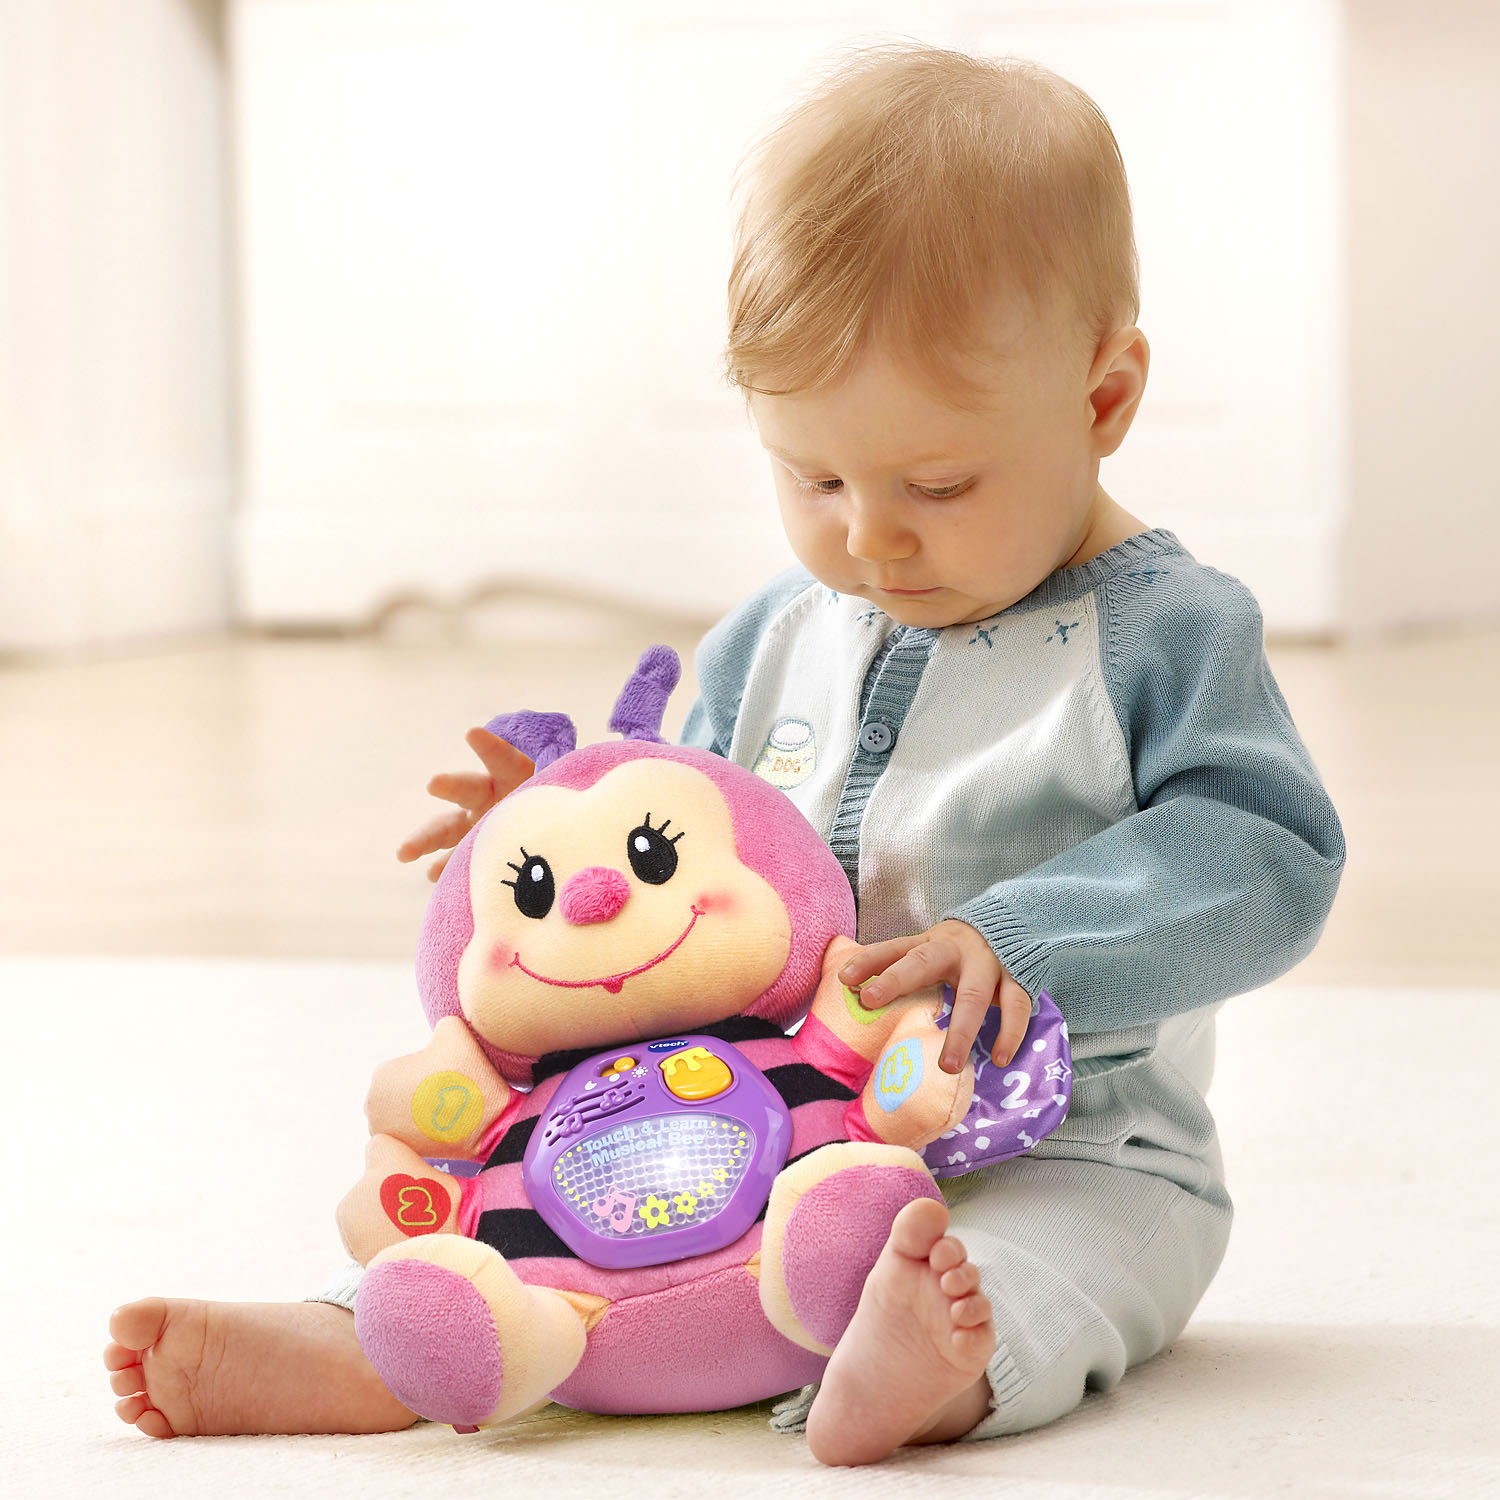 VTech Touch and Learn Musical Bee, Plush Crib Baby Toy, Pink, Walmart Exclusive - image 3 of 5